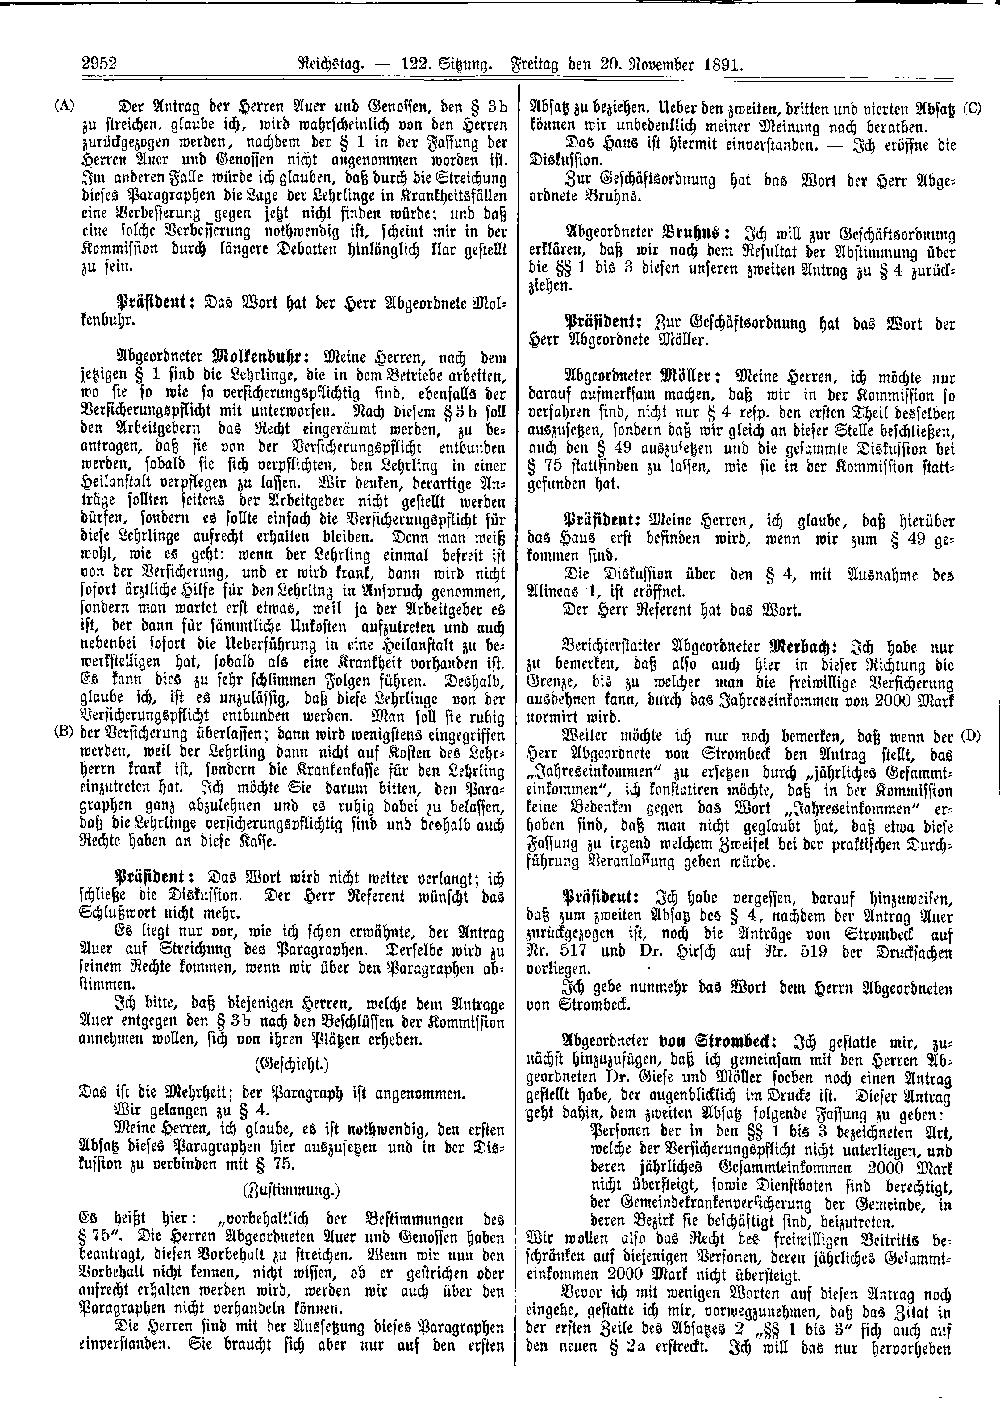 Scan of page 2952